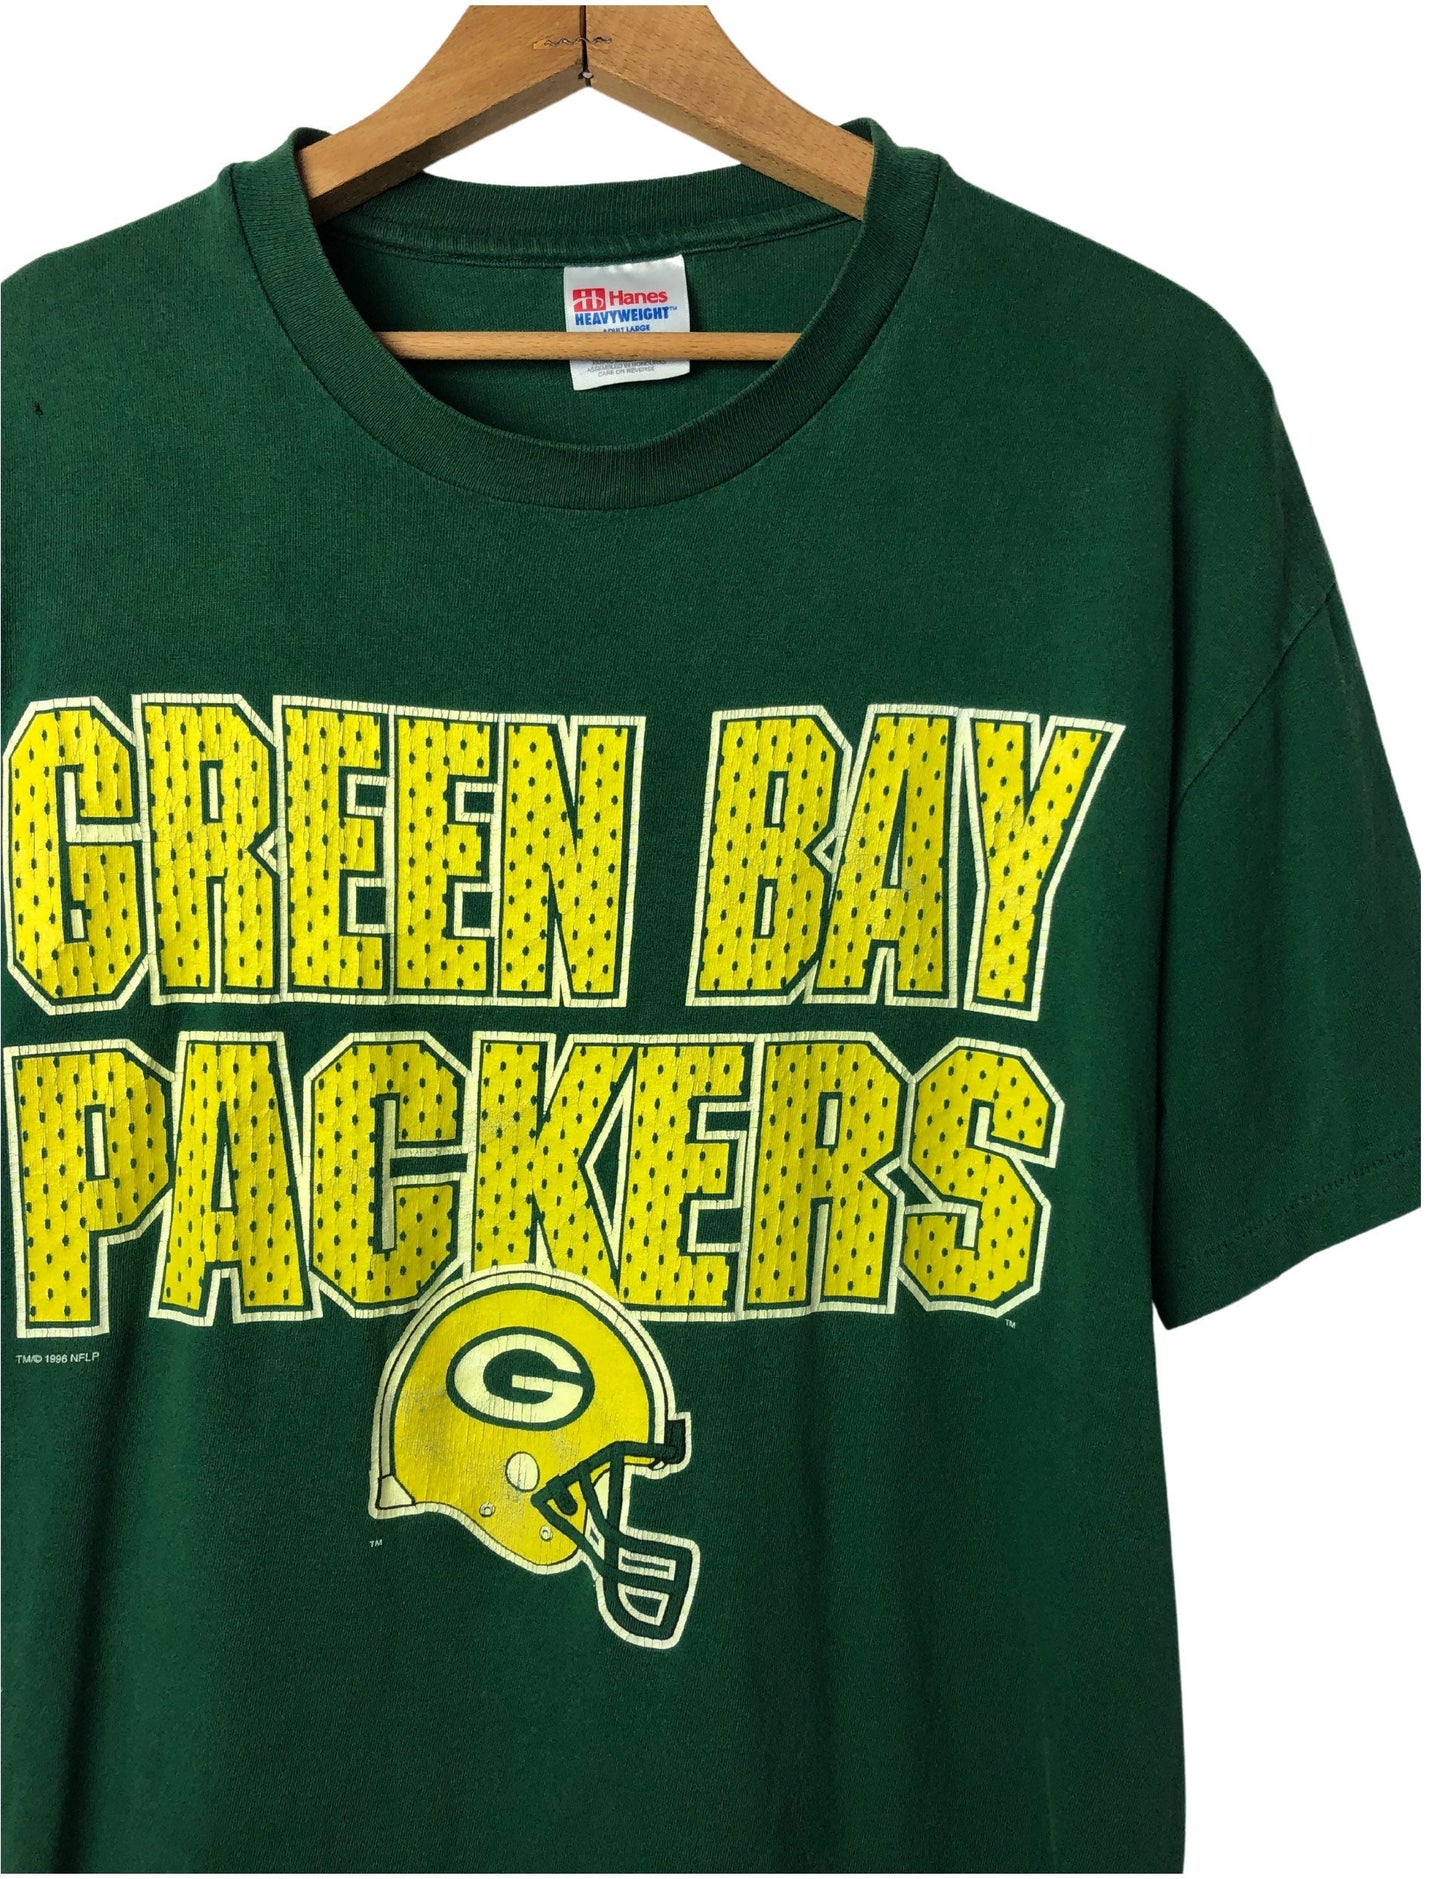 Vintage 1996 Green Bay Packers Football Super Soft 100% Cotton Hanes T-shirt Size Large